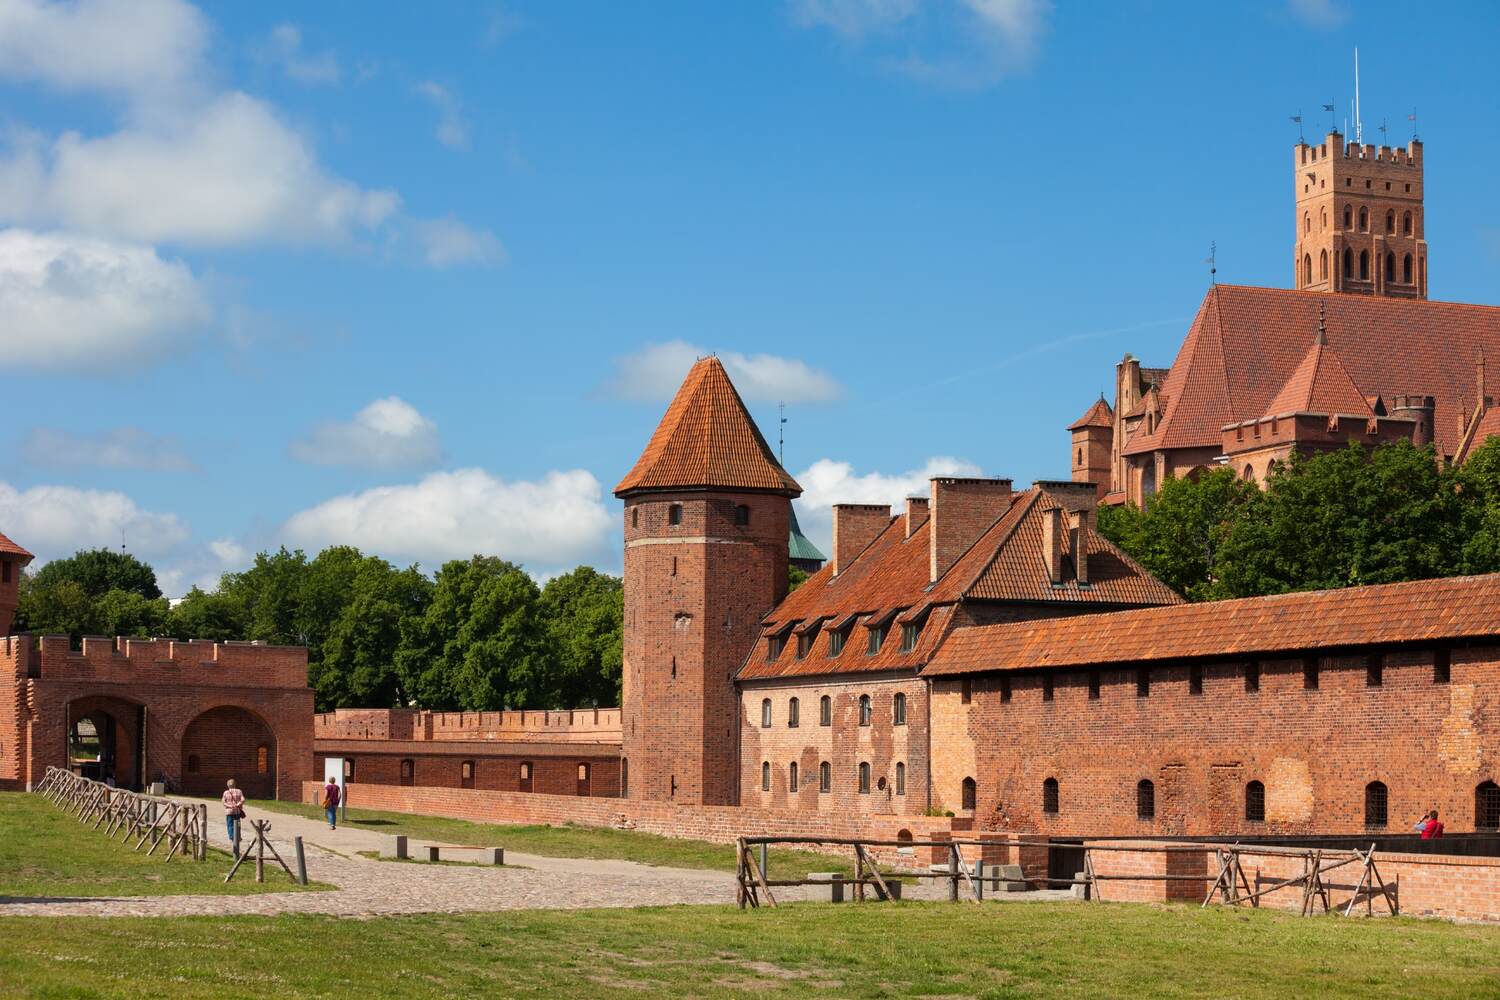 Discover-the-Malbork-Castle, A medieval brick castle with defensive towers, surrounded by a dry moat and green lawns under a clear blue sky.